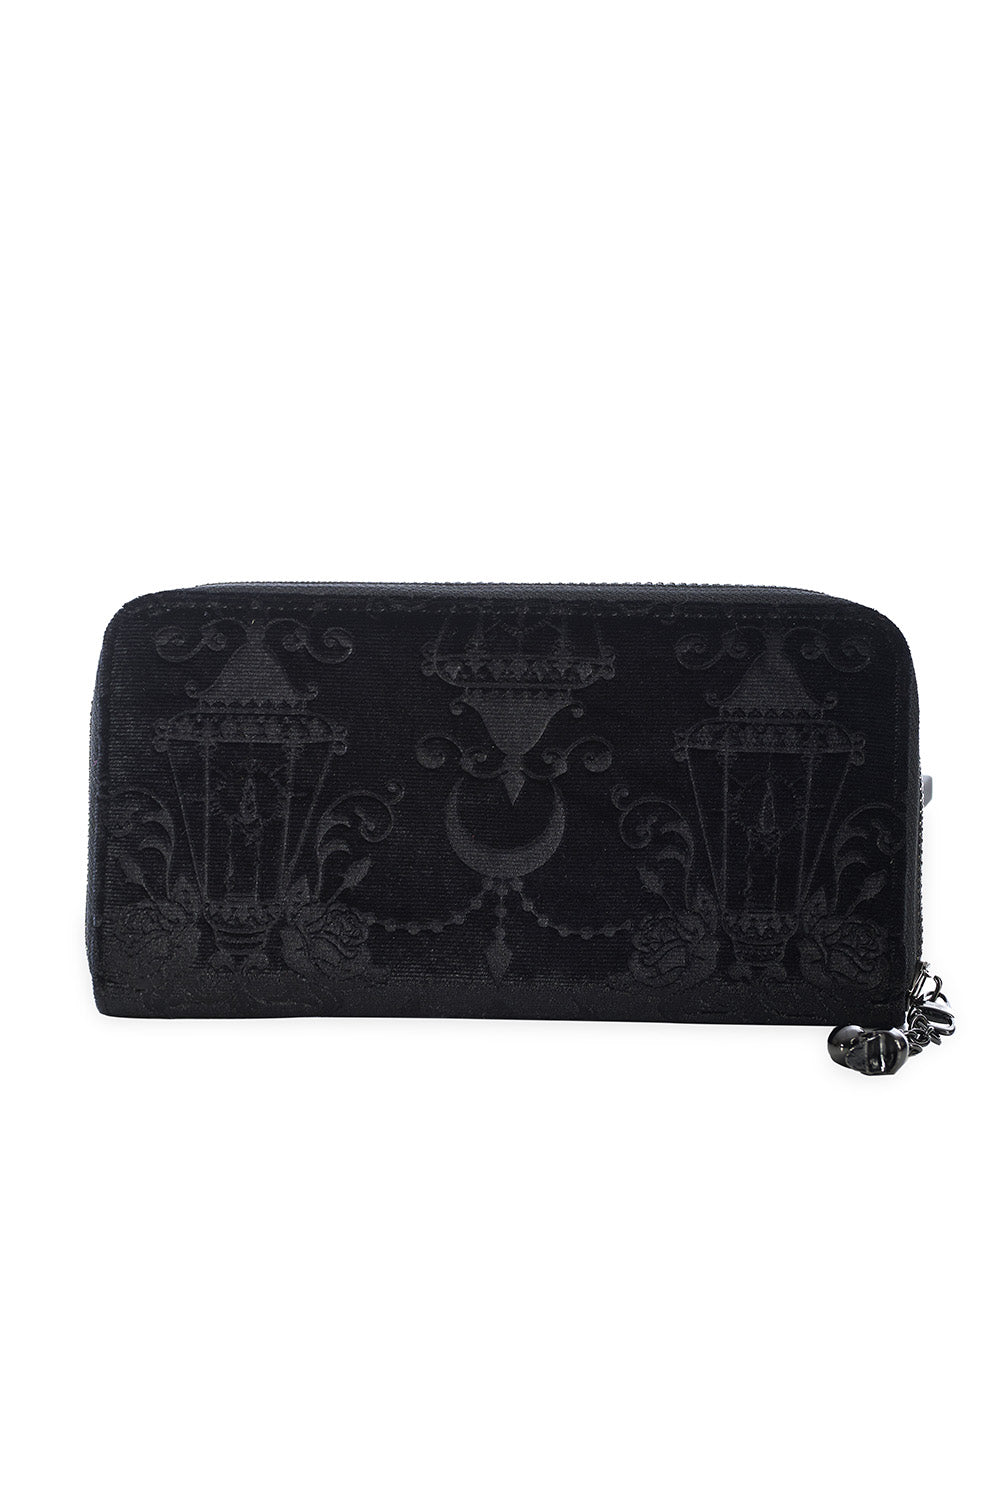 Zippered wallet with black velvet exterior that has an embossed damask pattern of chandeliers, candles, roses, and crescent moons. It has gunmetal tone hardware with a skull shaped charm attached to the zipper. Seen closed from the side